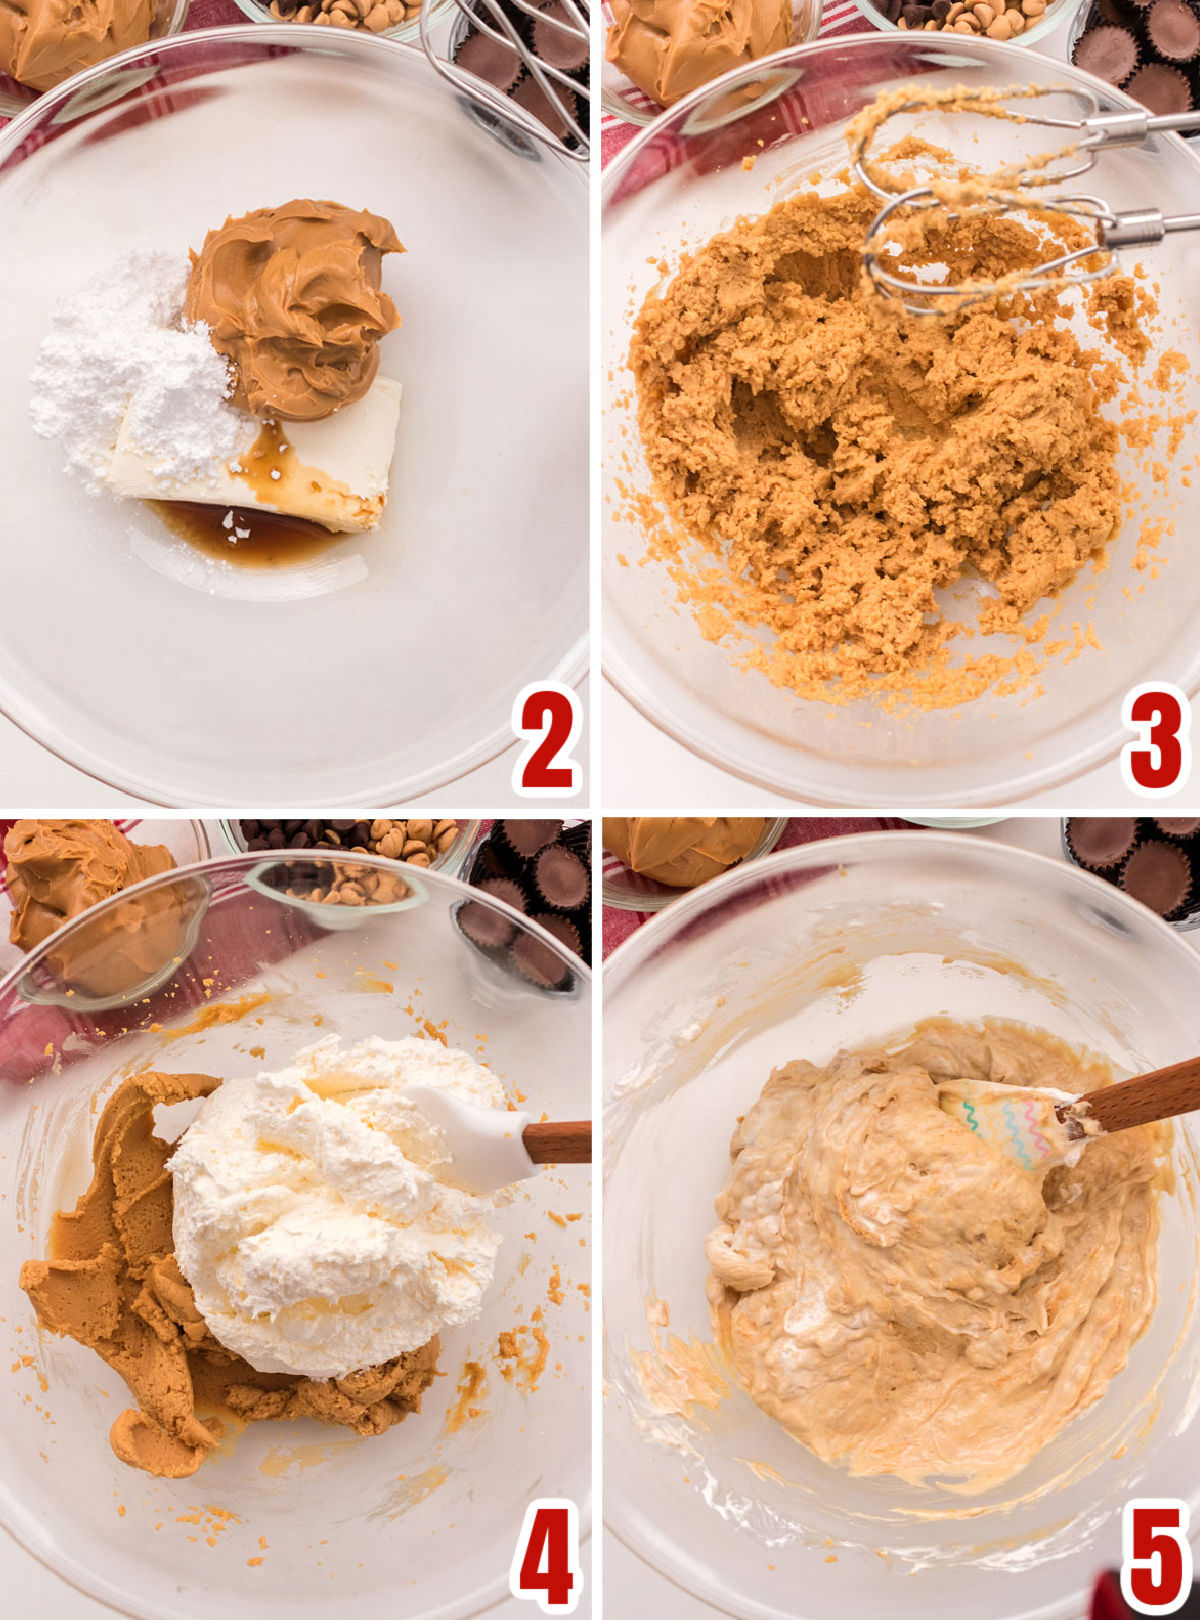 Collage image showing all the steps for making the Peanut Butter filling.